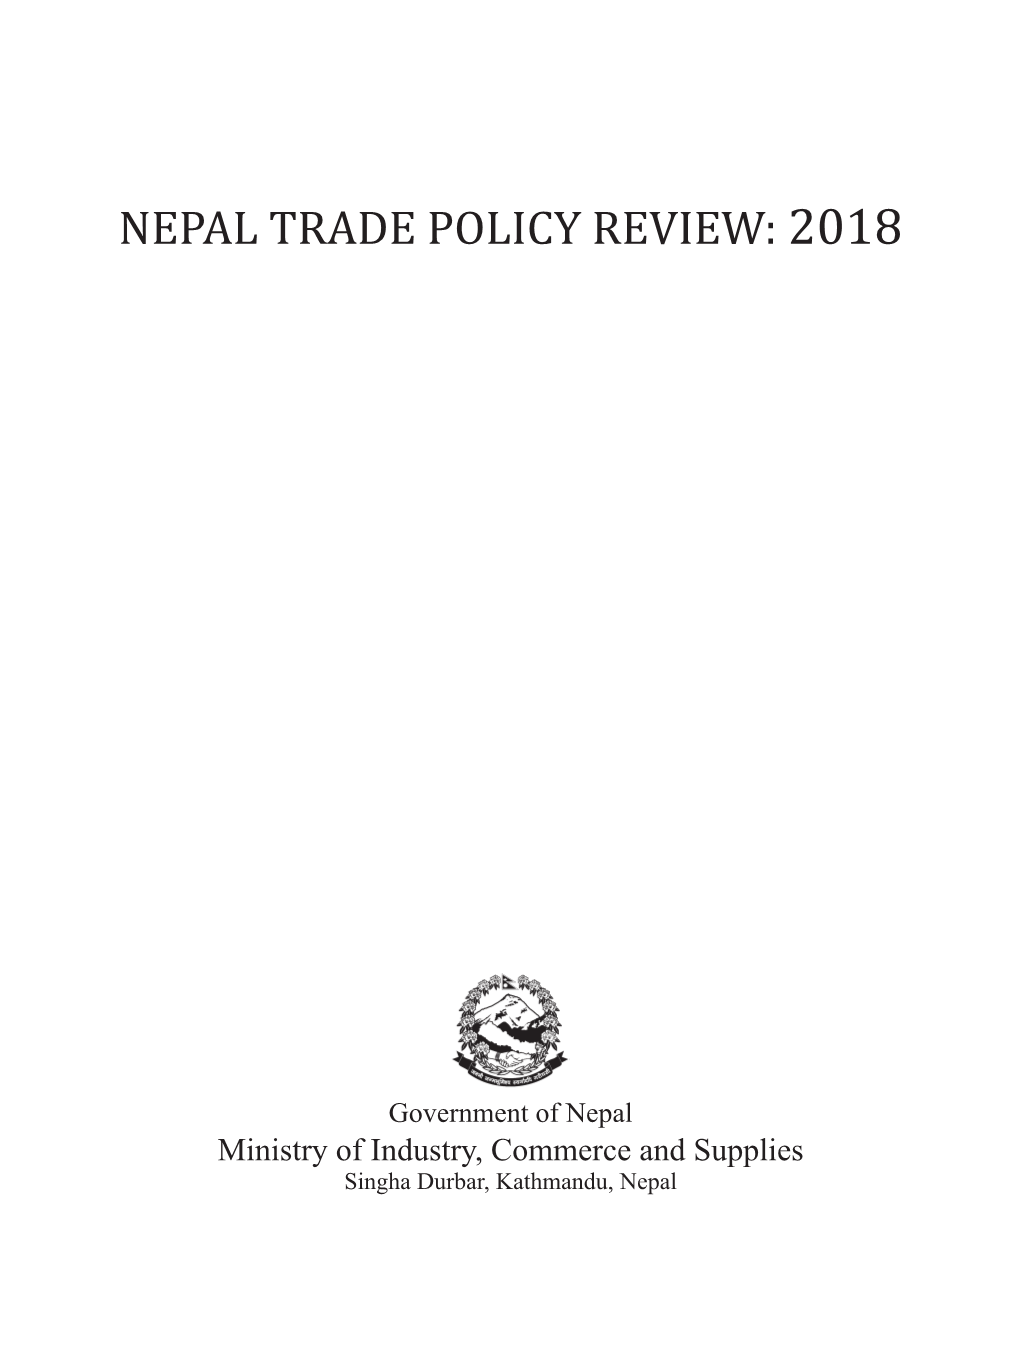 Nepal Trade Policy Review: 2018